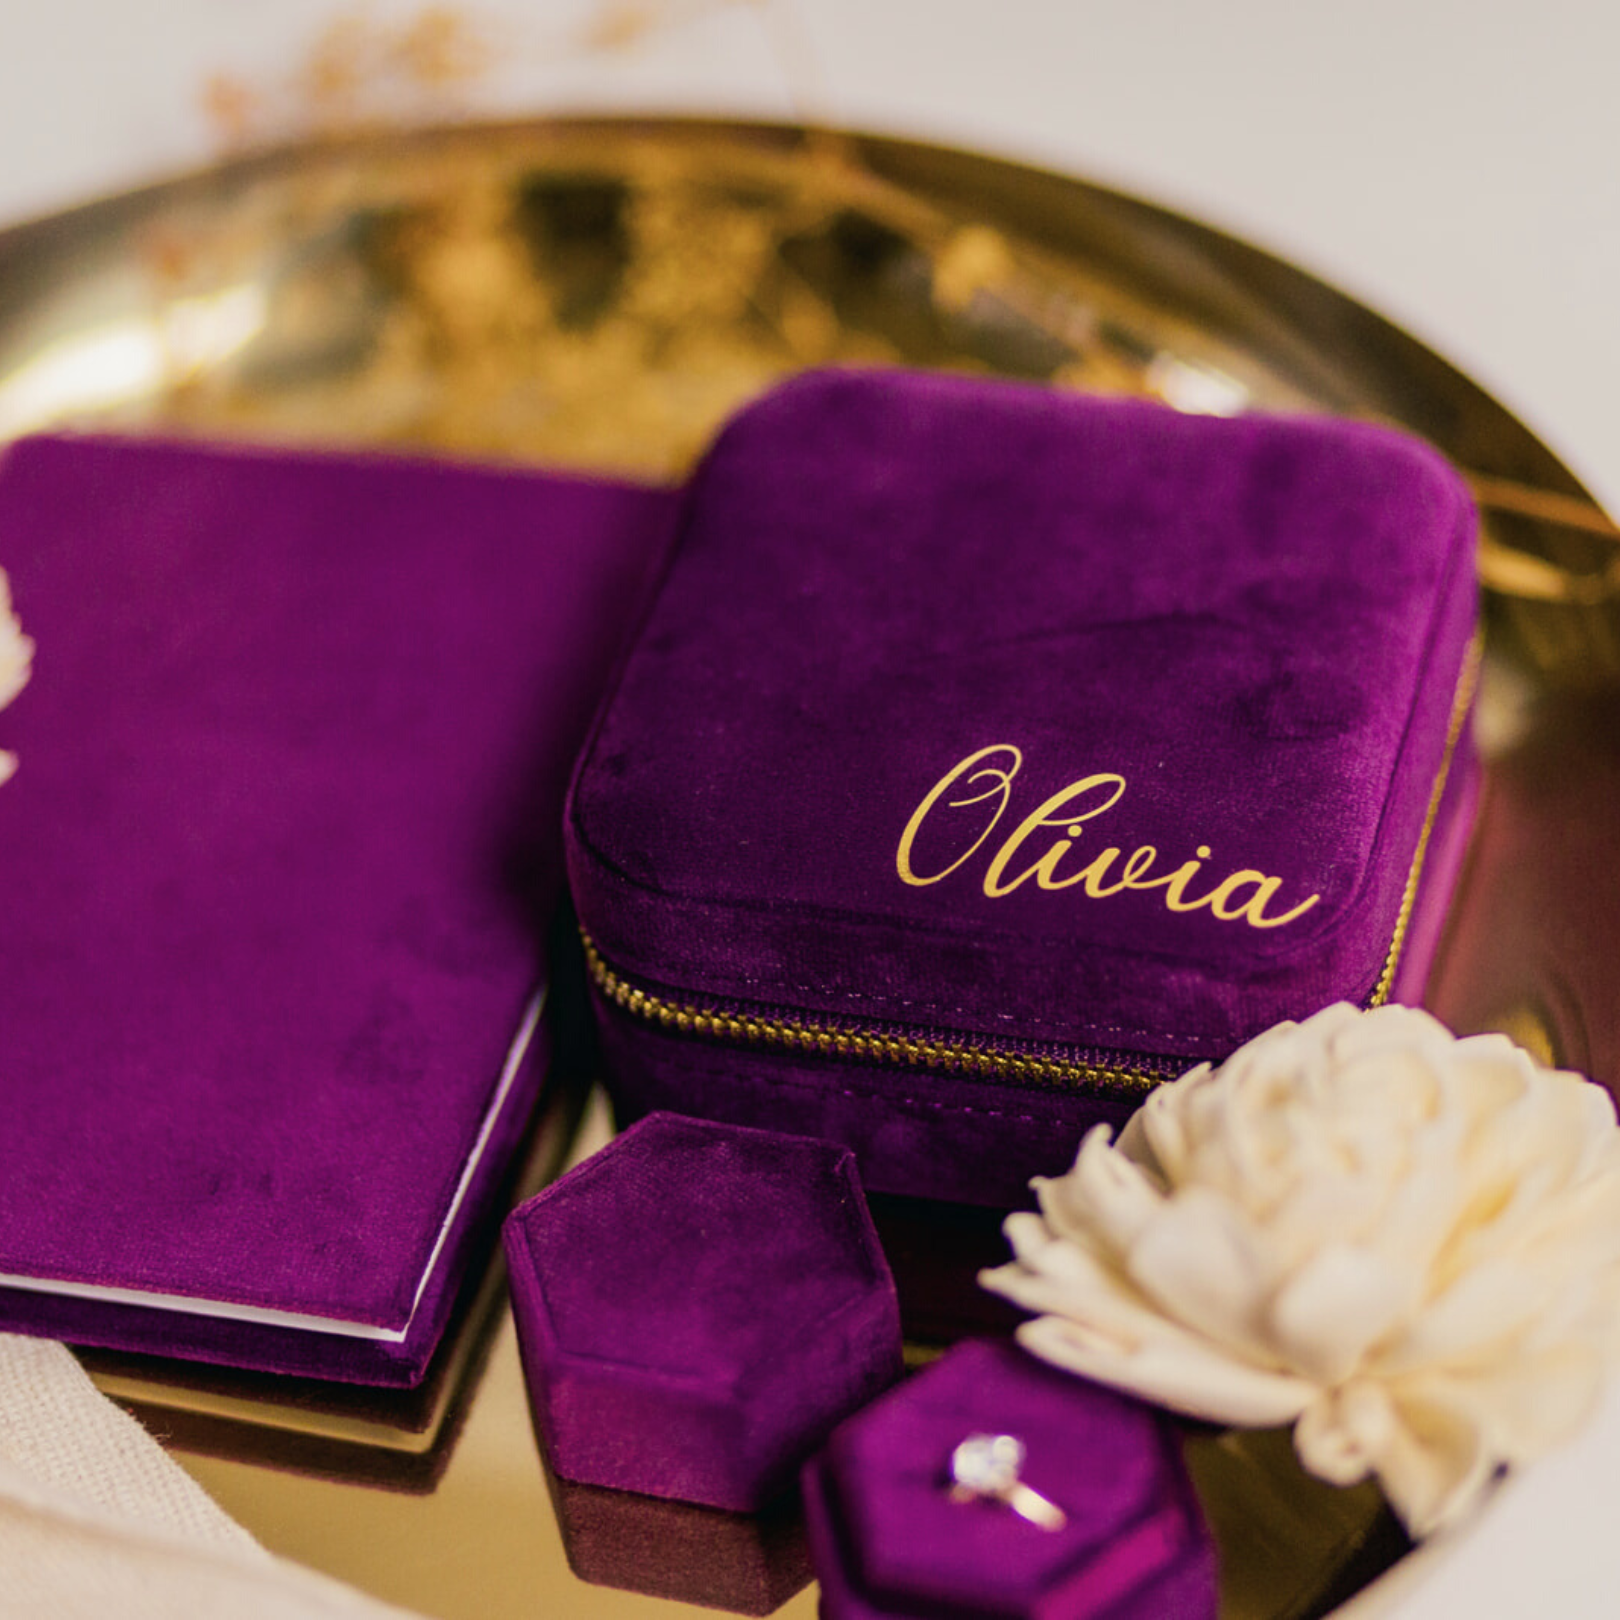 A dark purple jewelry case, vow book and ring box sit in a shallow gold bowl. An off white flower is nestled below the jewelry case which reads "Olivia" in a cursive font. 